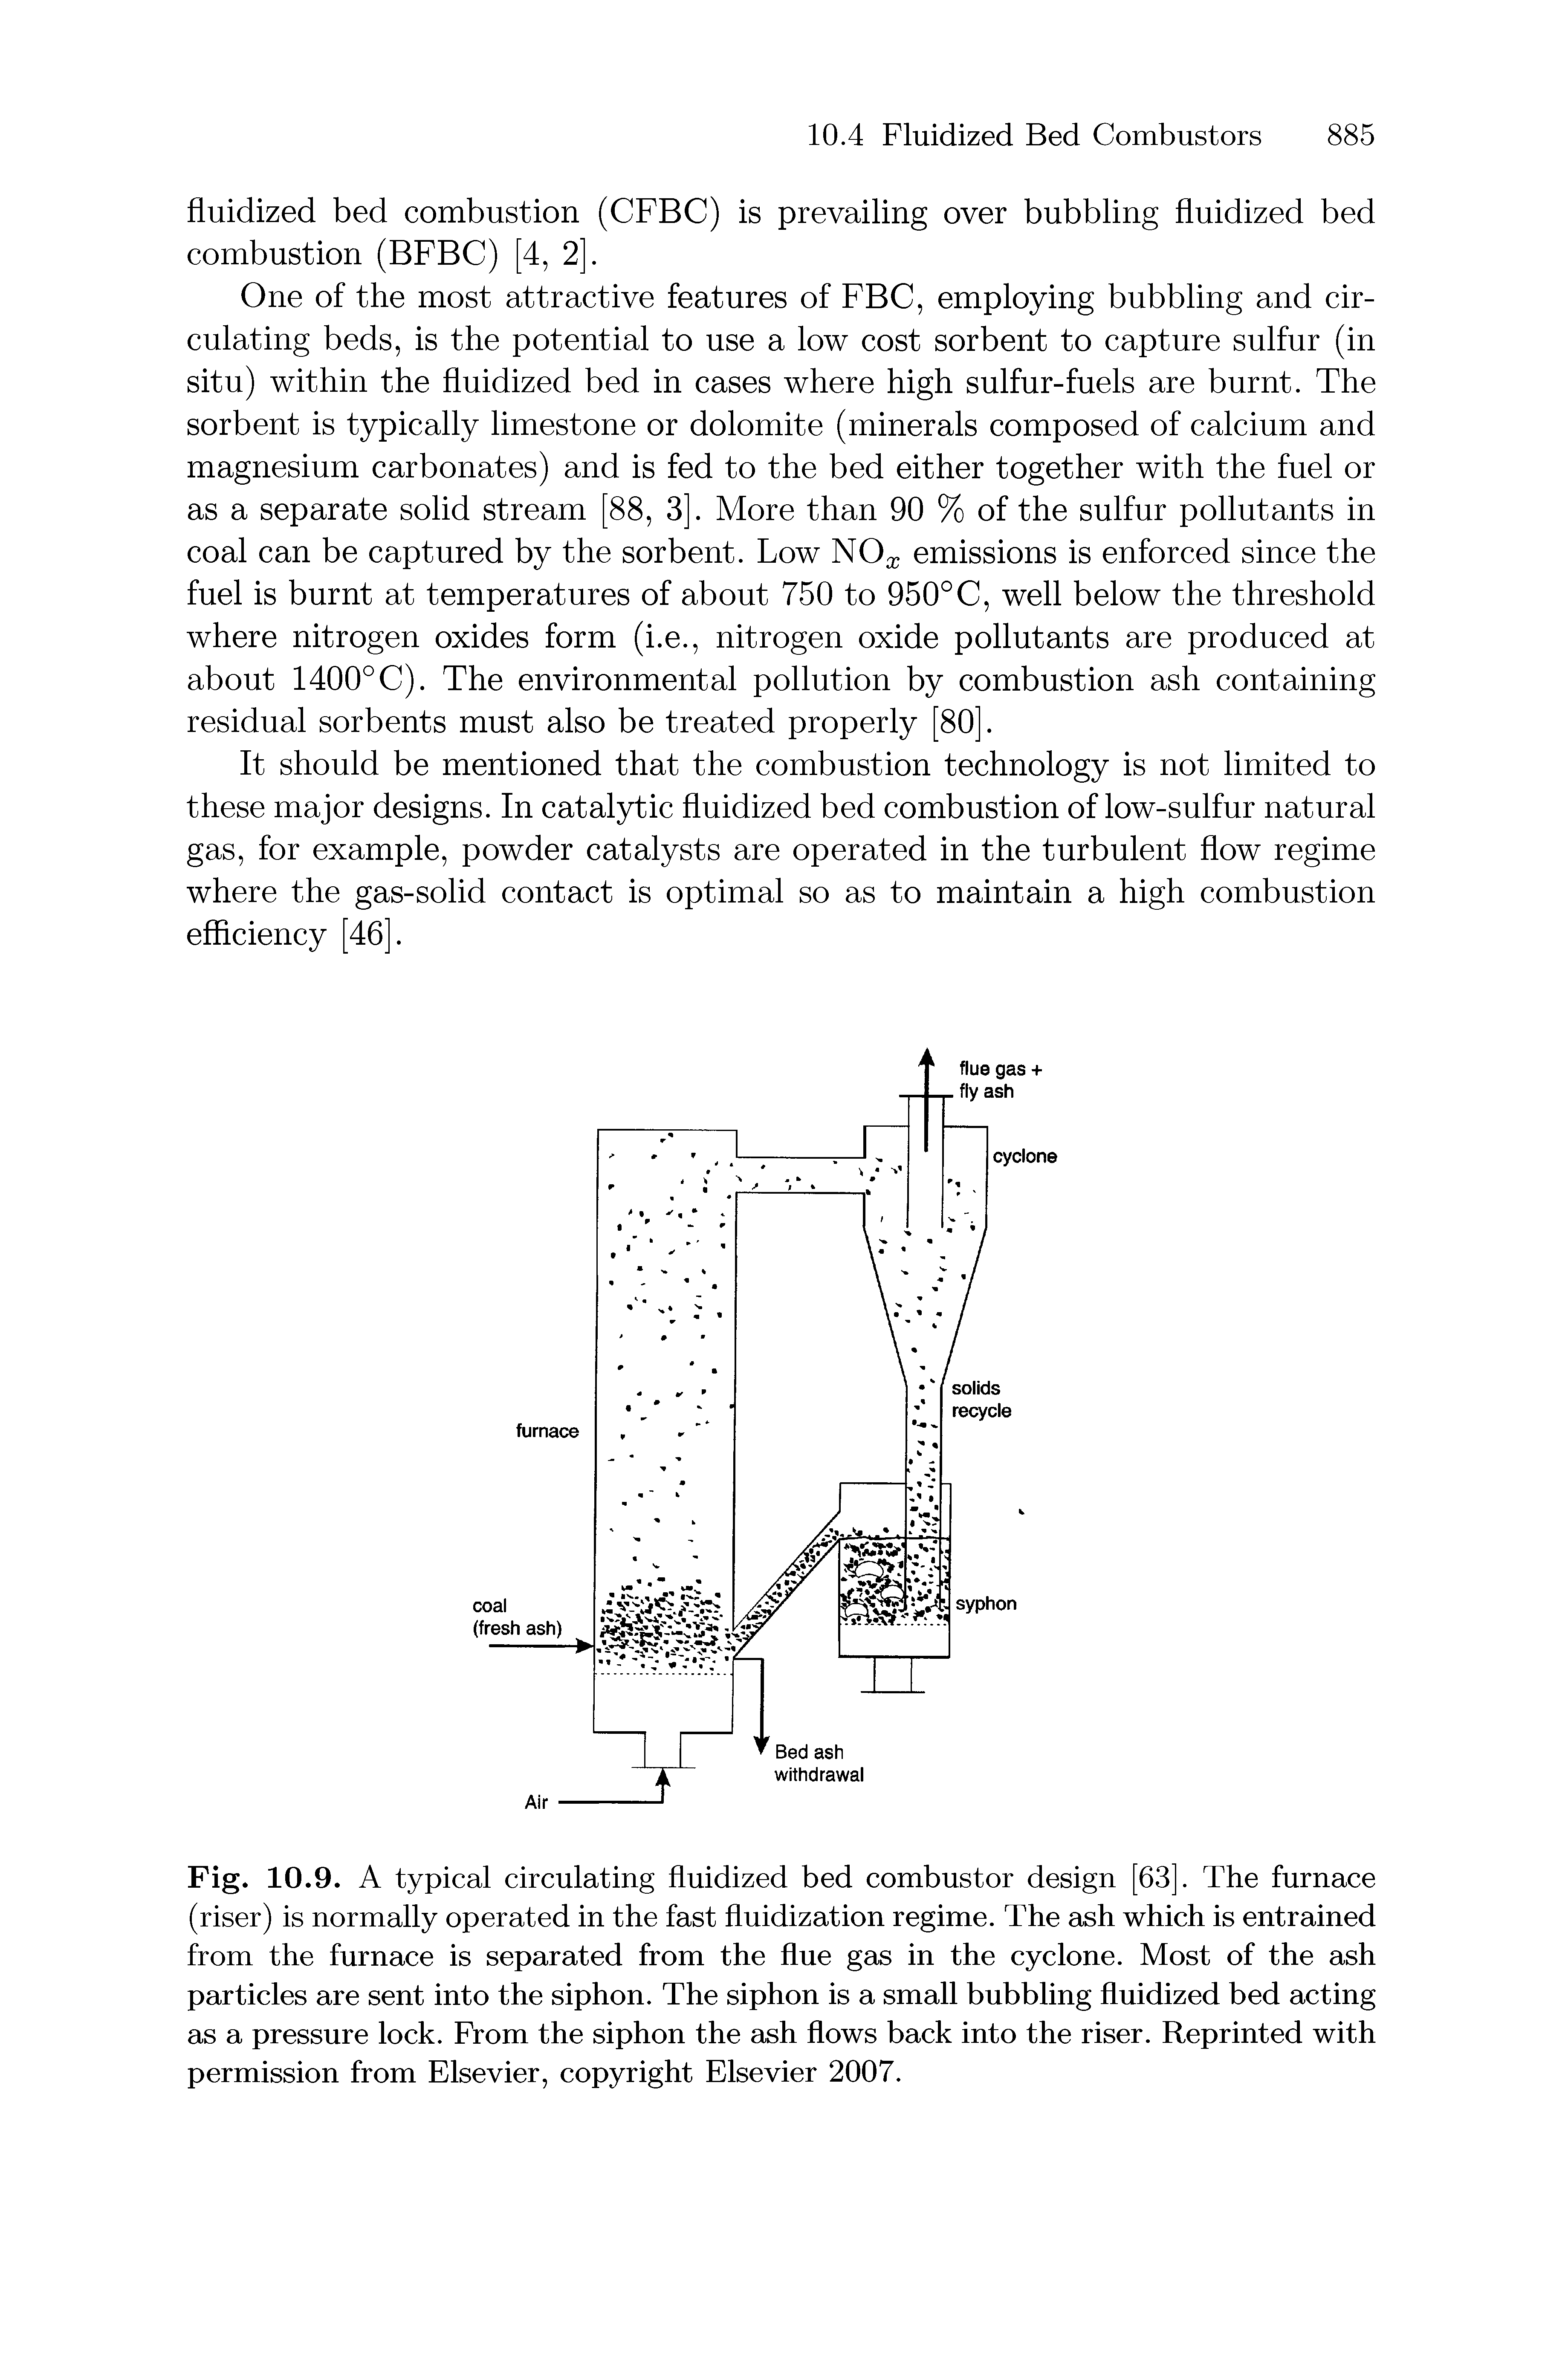 Fig. 10.9. A typical circulating fluidized bed combustor design [63]. The furnace (riser) is normally operated in the fast fluidization regime. The ash which is entrained from the furnace is separated from the flue gas in the cyclone. Most of the ash particles are sent into the siphon. The siphon is a small bubbling fluidized bed acting as a pressure lock. From the siphon the ash flows back into the riser. Reprinted with permission from Elsevier, copyright Elsevier 2007.